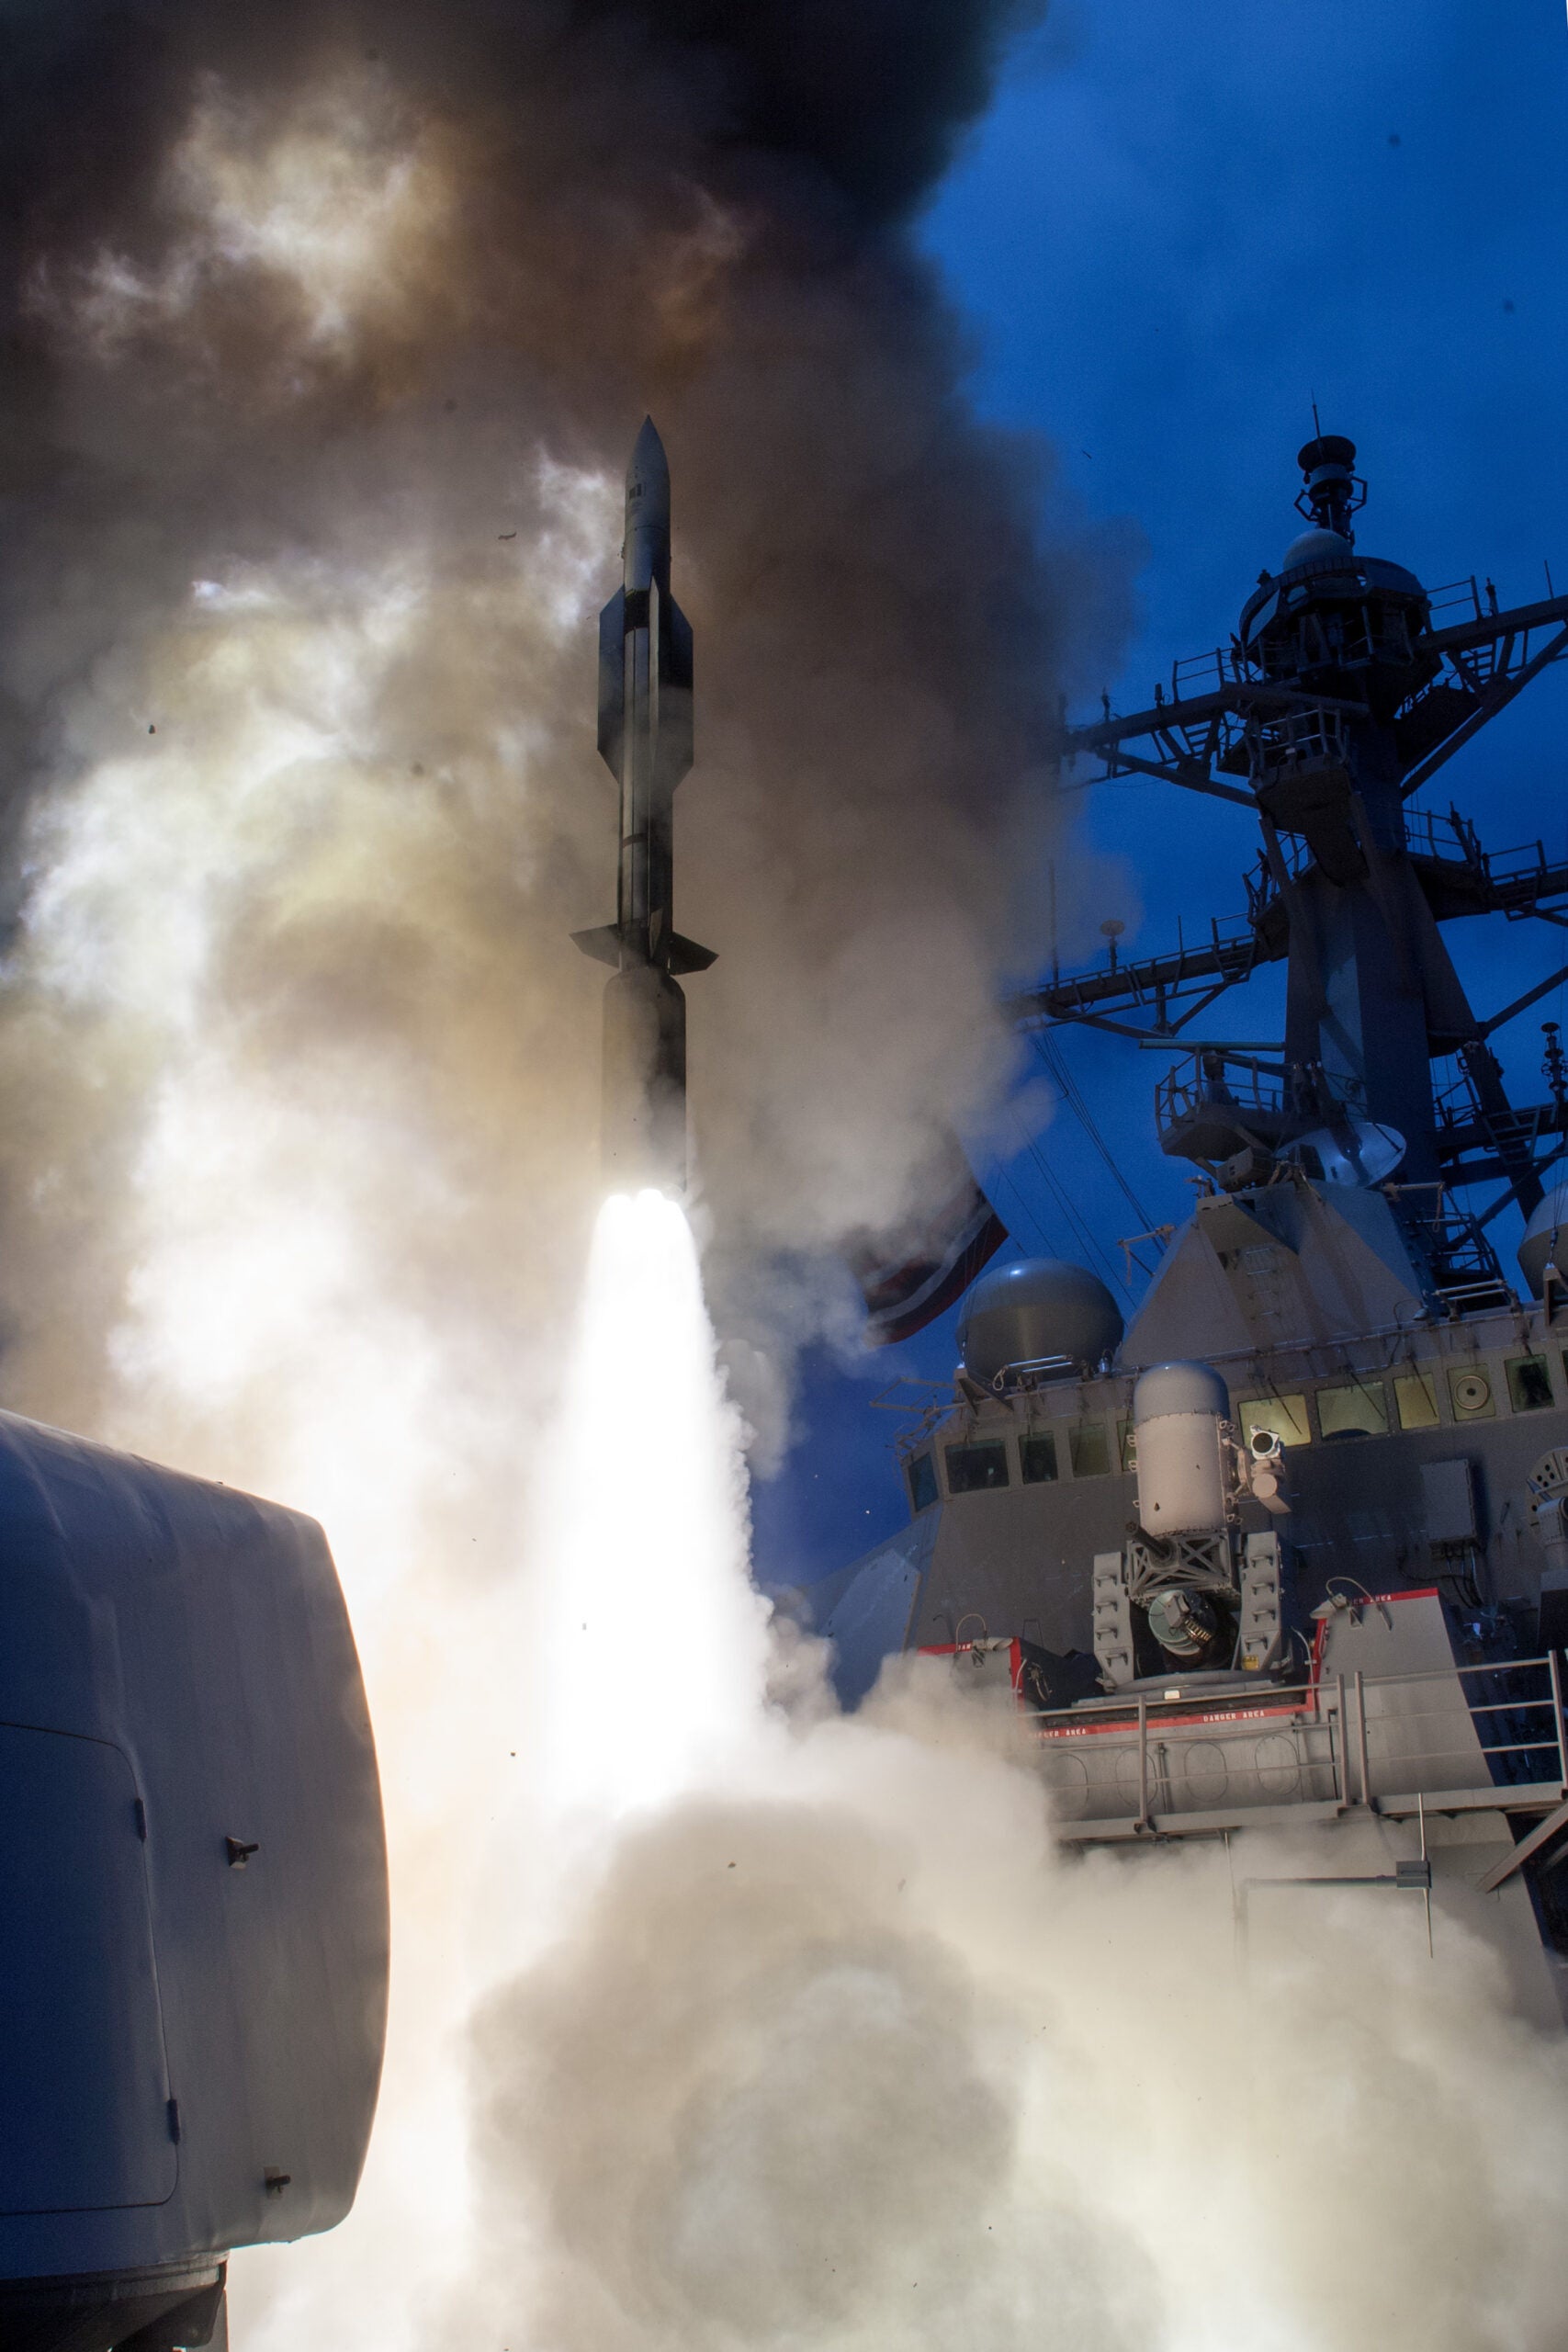 The Arleigh-Burke class guided-missile destroyer USS John Paul Jones (DDG 53) launches a Standard Missile-6 (SM-6) during a live-fire test of the ship's aegis weapons system. Over the course of three days, the crew of John Paul Jones successfully engaged six targets, firing a total of five missiles that included four SM-6 models and one Standard Missile-2 (SM-2) model. (U.S. Navy photo/Released)